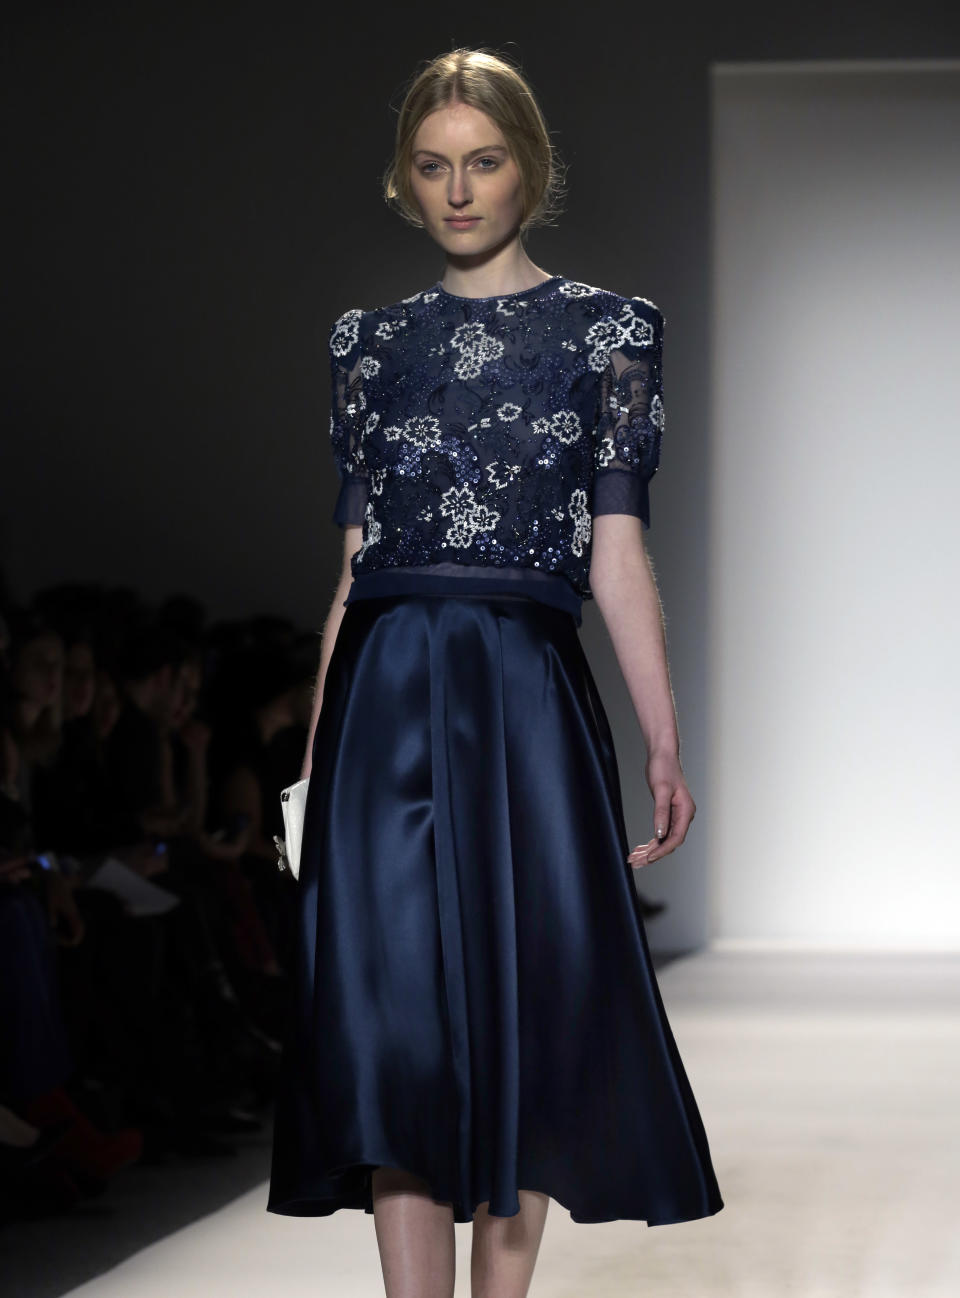 The Jenny Packham Fall 2013 collection is modeled during Fashion Week in New York on Tuesday, Feb. 12, 2013. (AP Photo/Richard Drew)